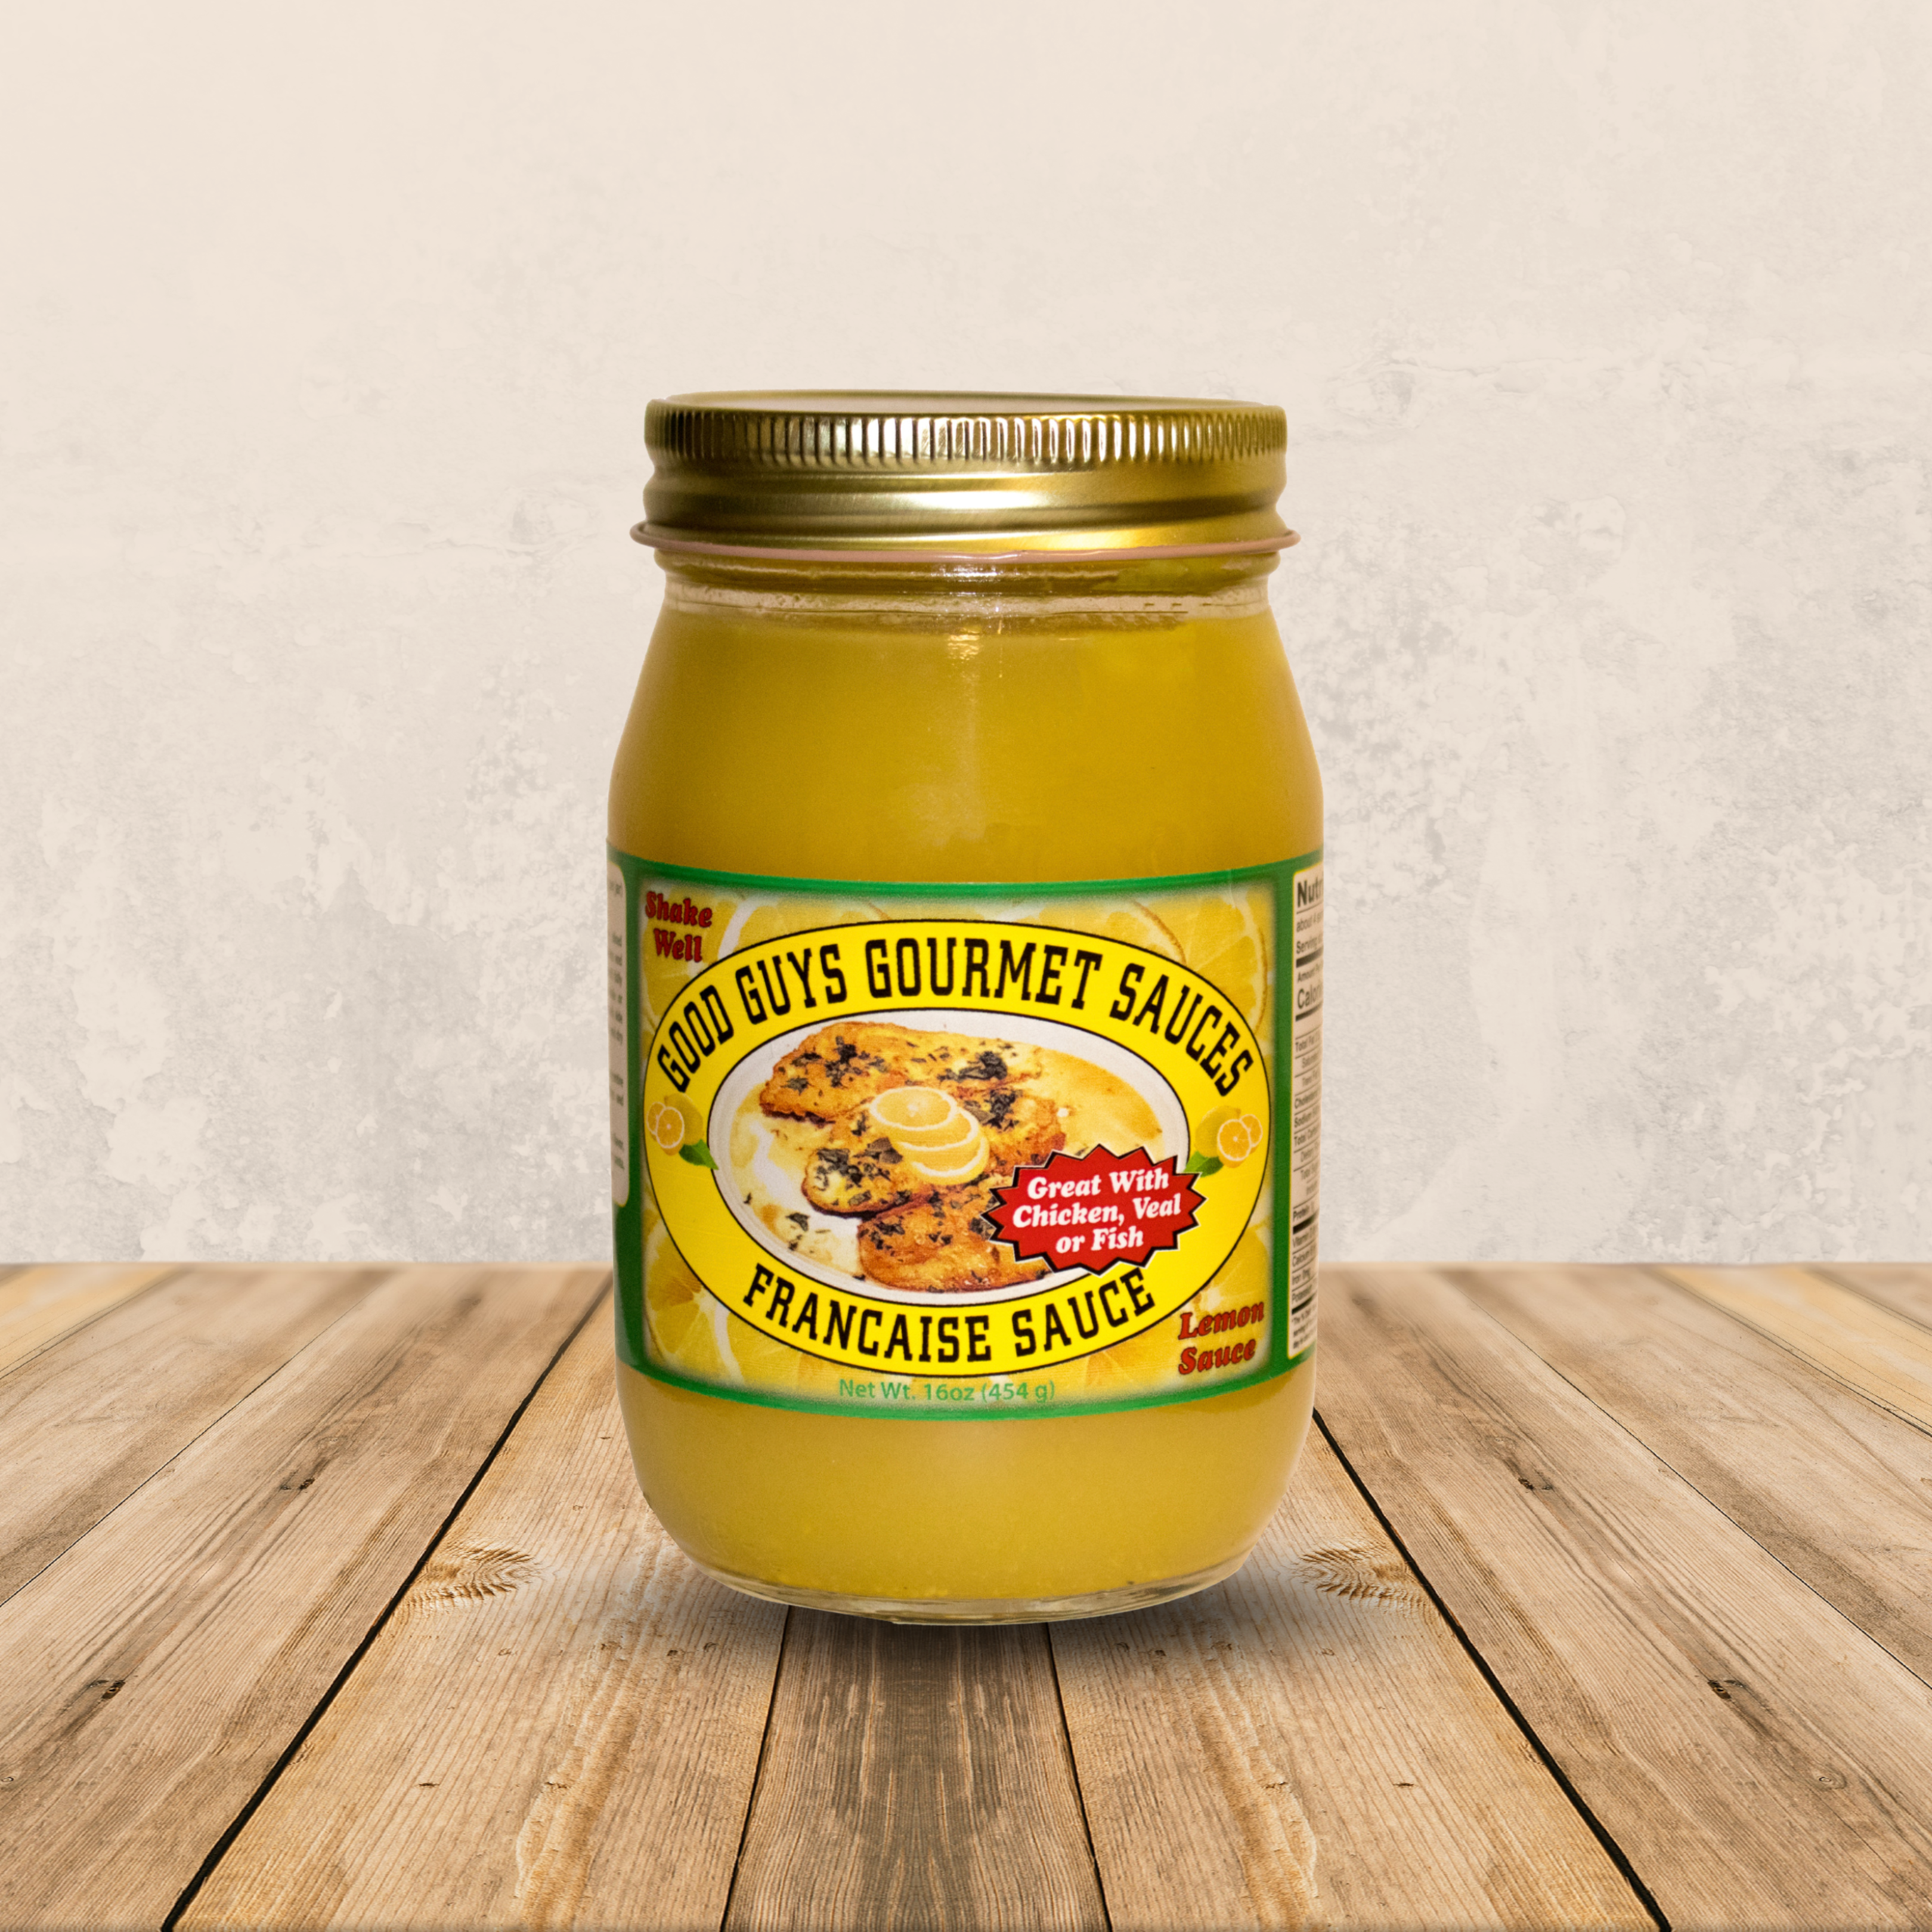  Paesana Francese Gourmet Cooking Sauce - Simmer Sauce made with  White Wine – Great with Chicken or Veal, Fish. Kosher Dairy. 15.75 oz. Jar  - Packed in USA (6 Pack) : Grocery & Gourmet Food